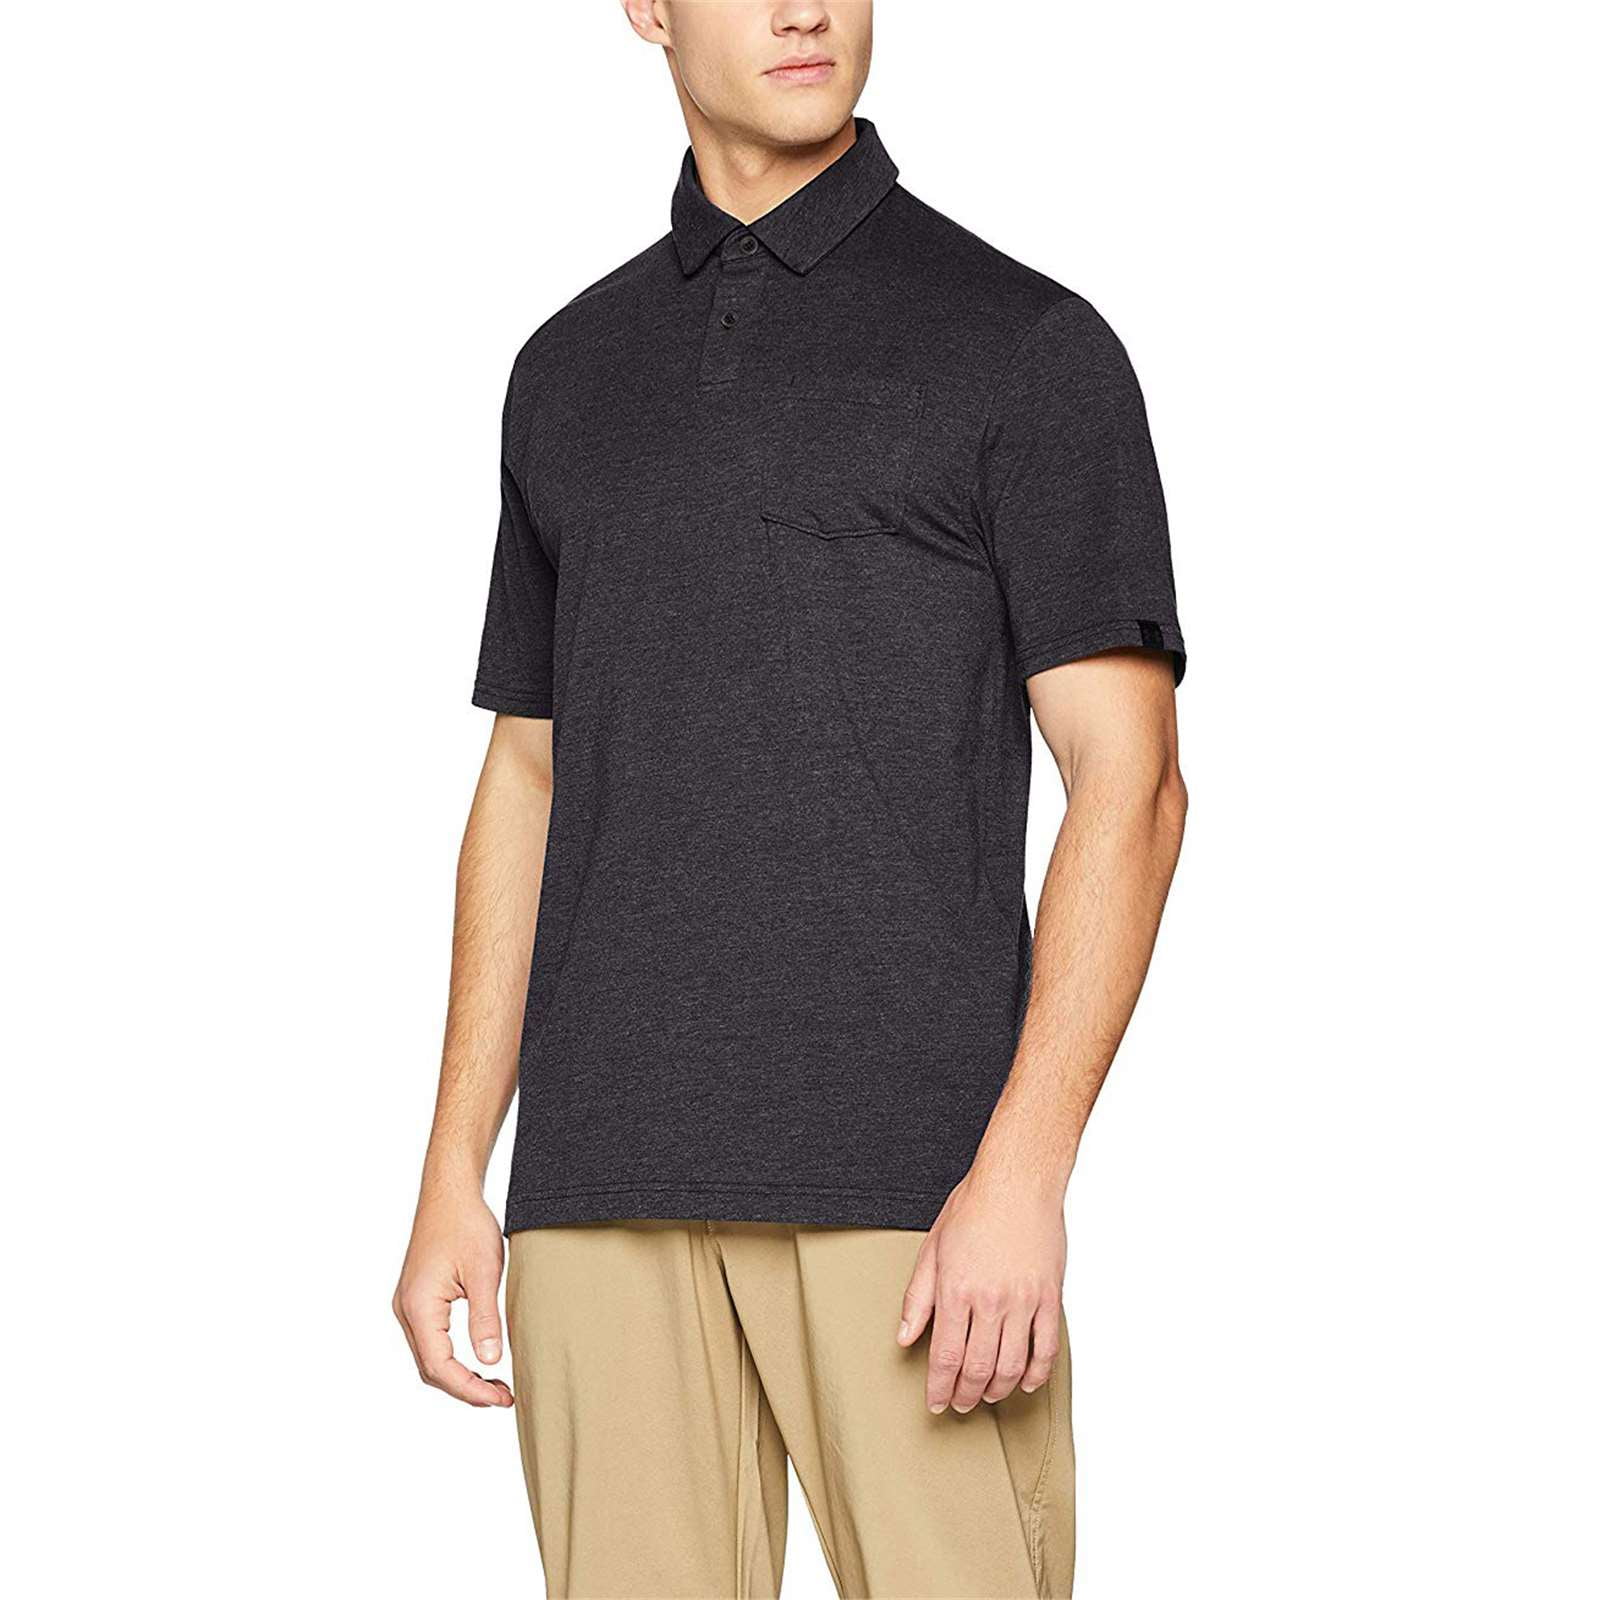 Top 10 Best Men's Polo Shirts You Can Buy On Amazon Right Now! | vlr.eng.br